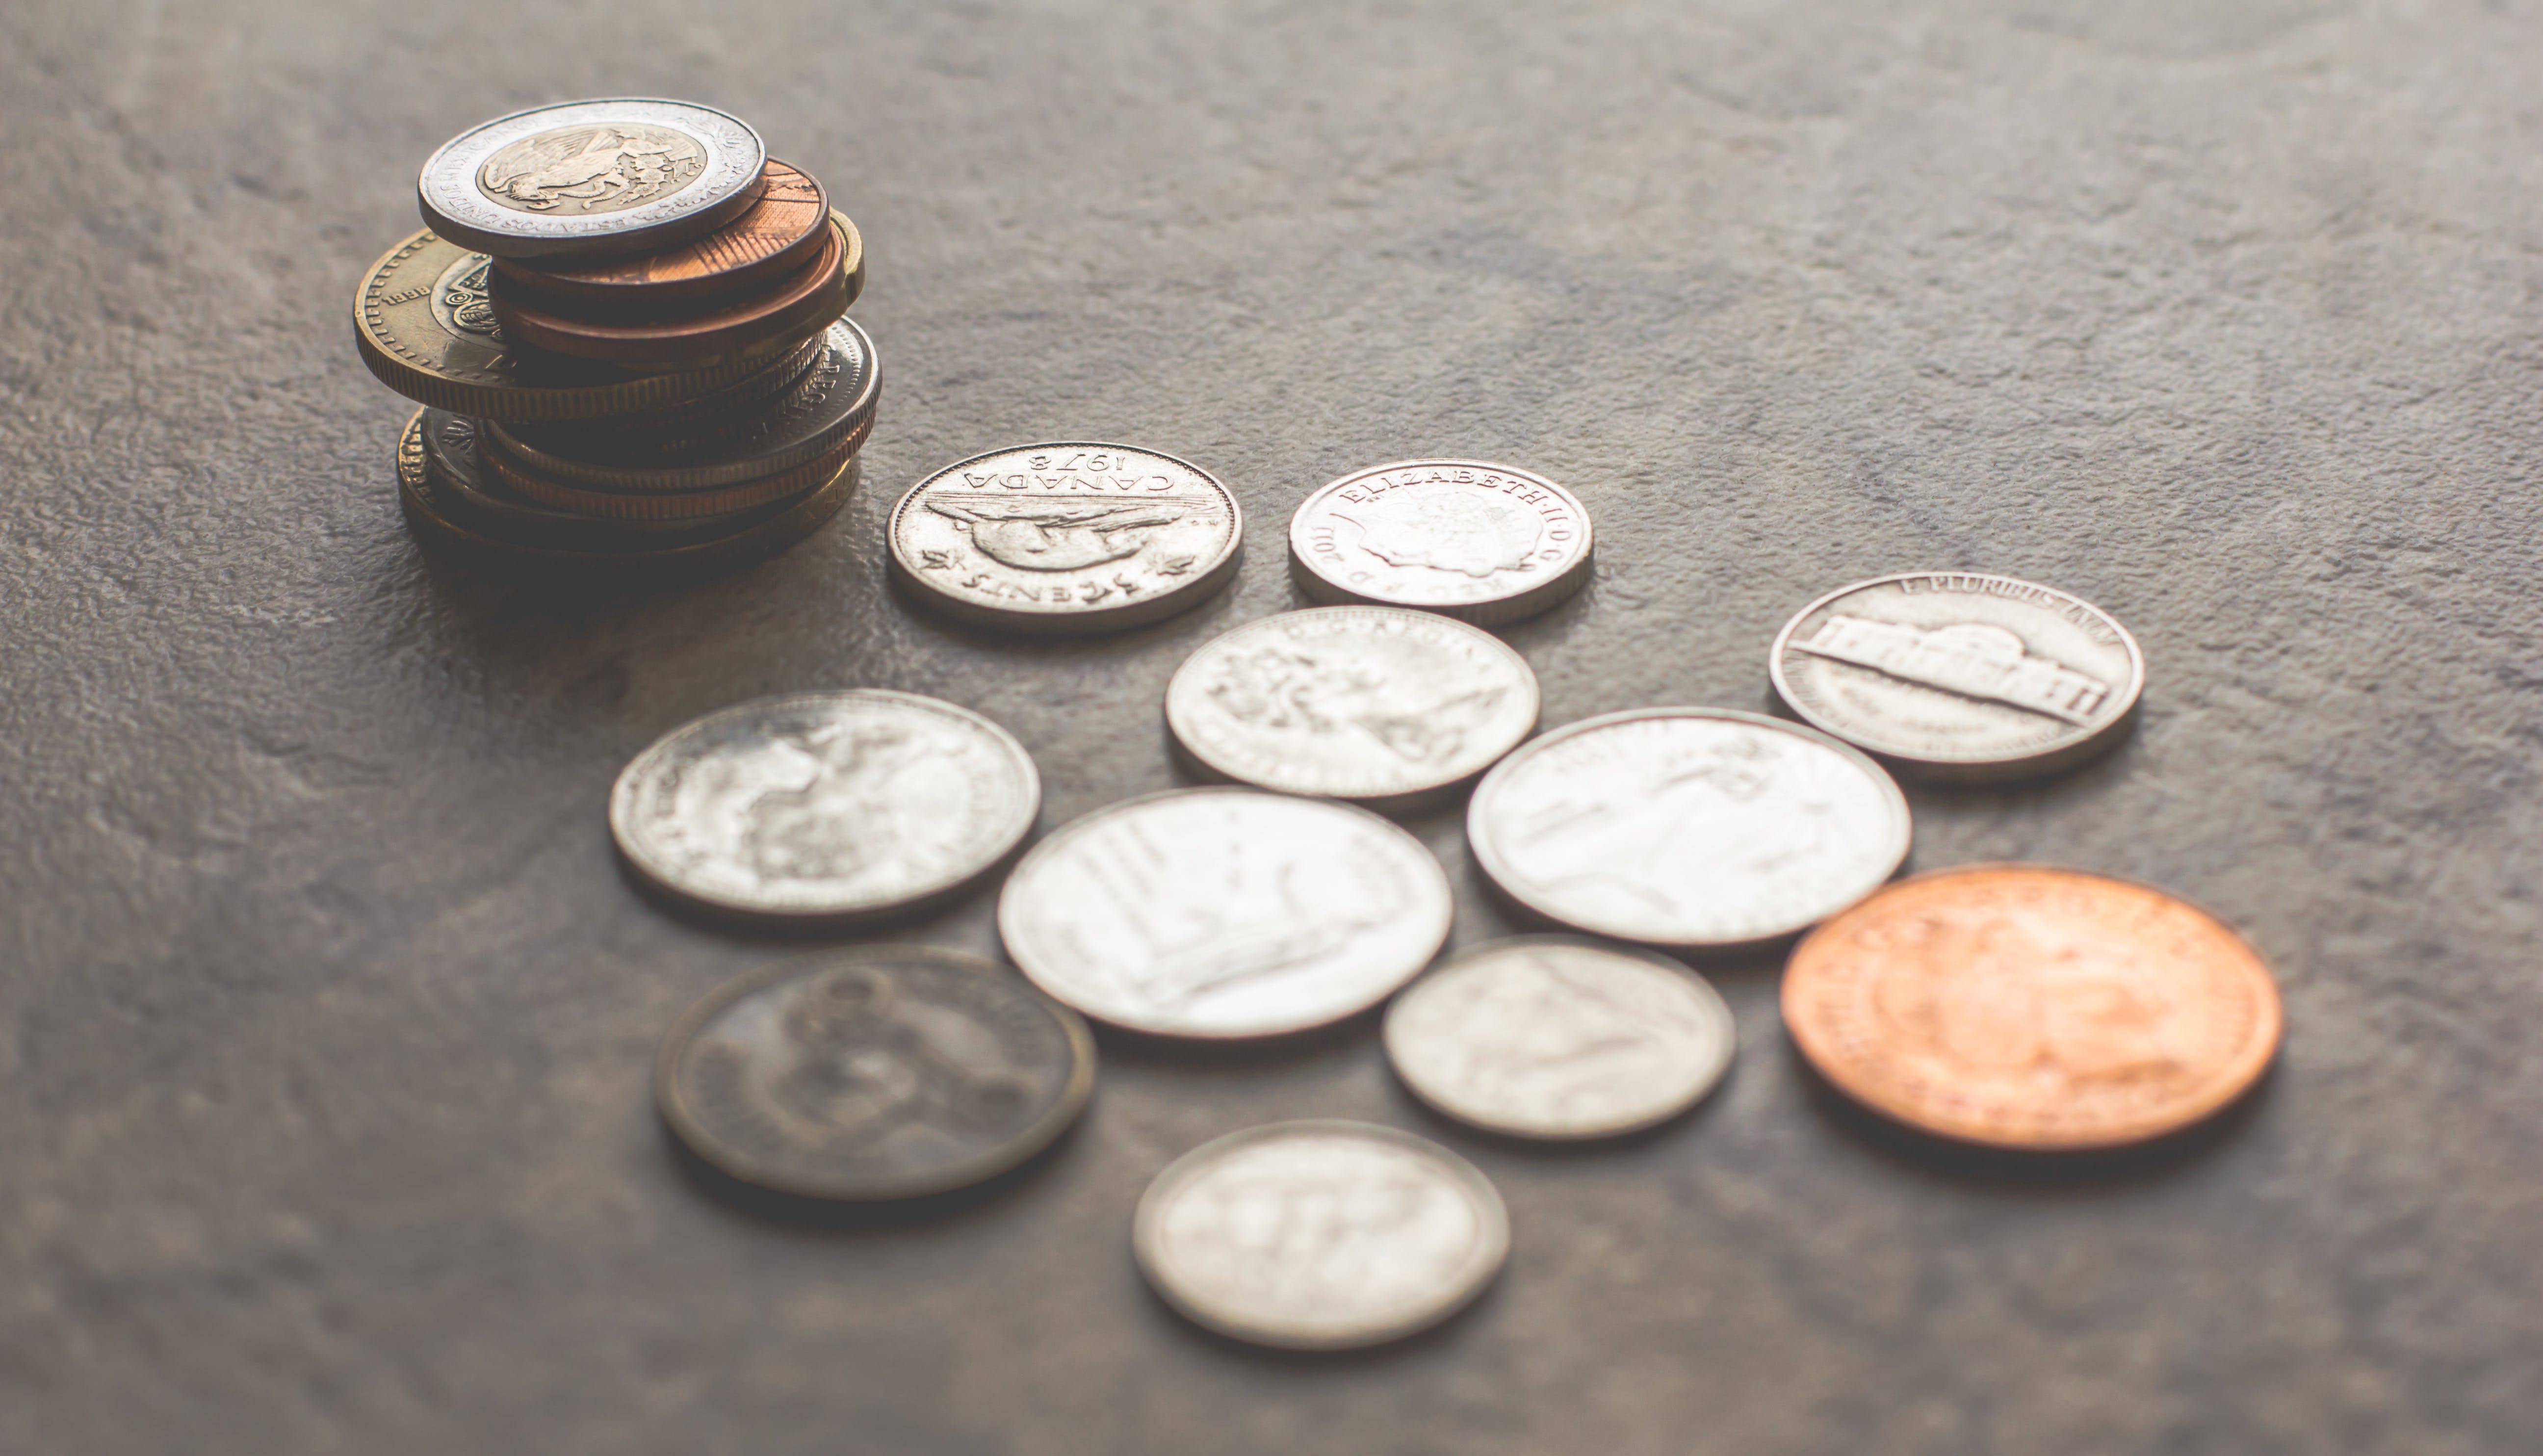 Gold and silver coins on a grey surface. | Source: Pexels